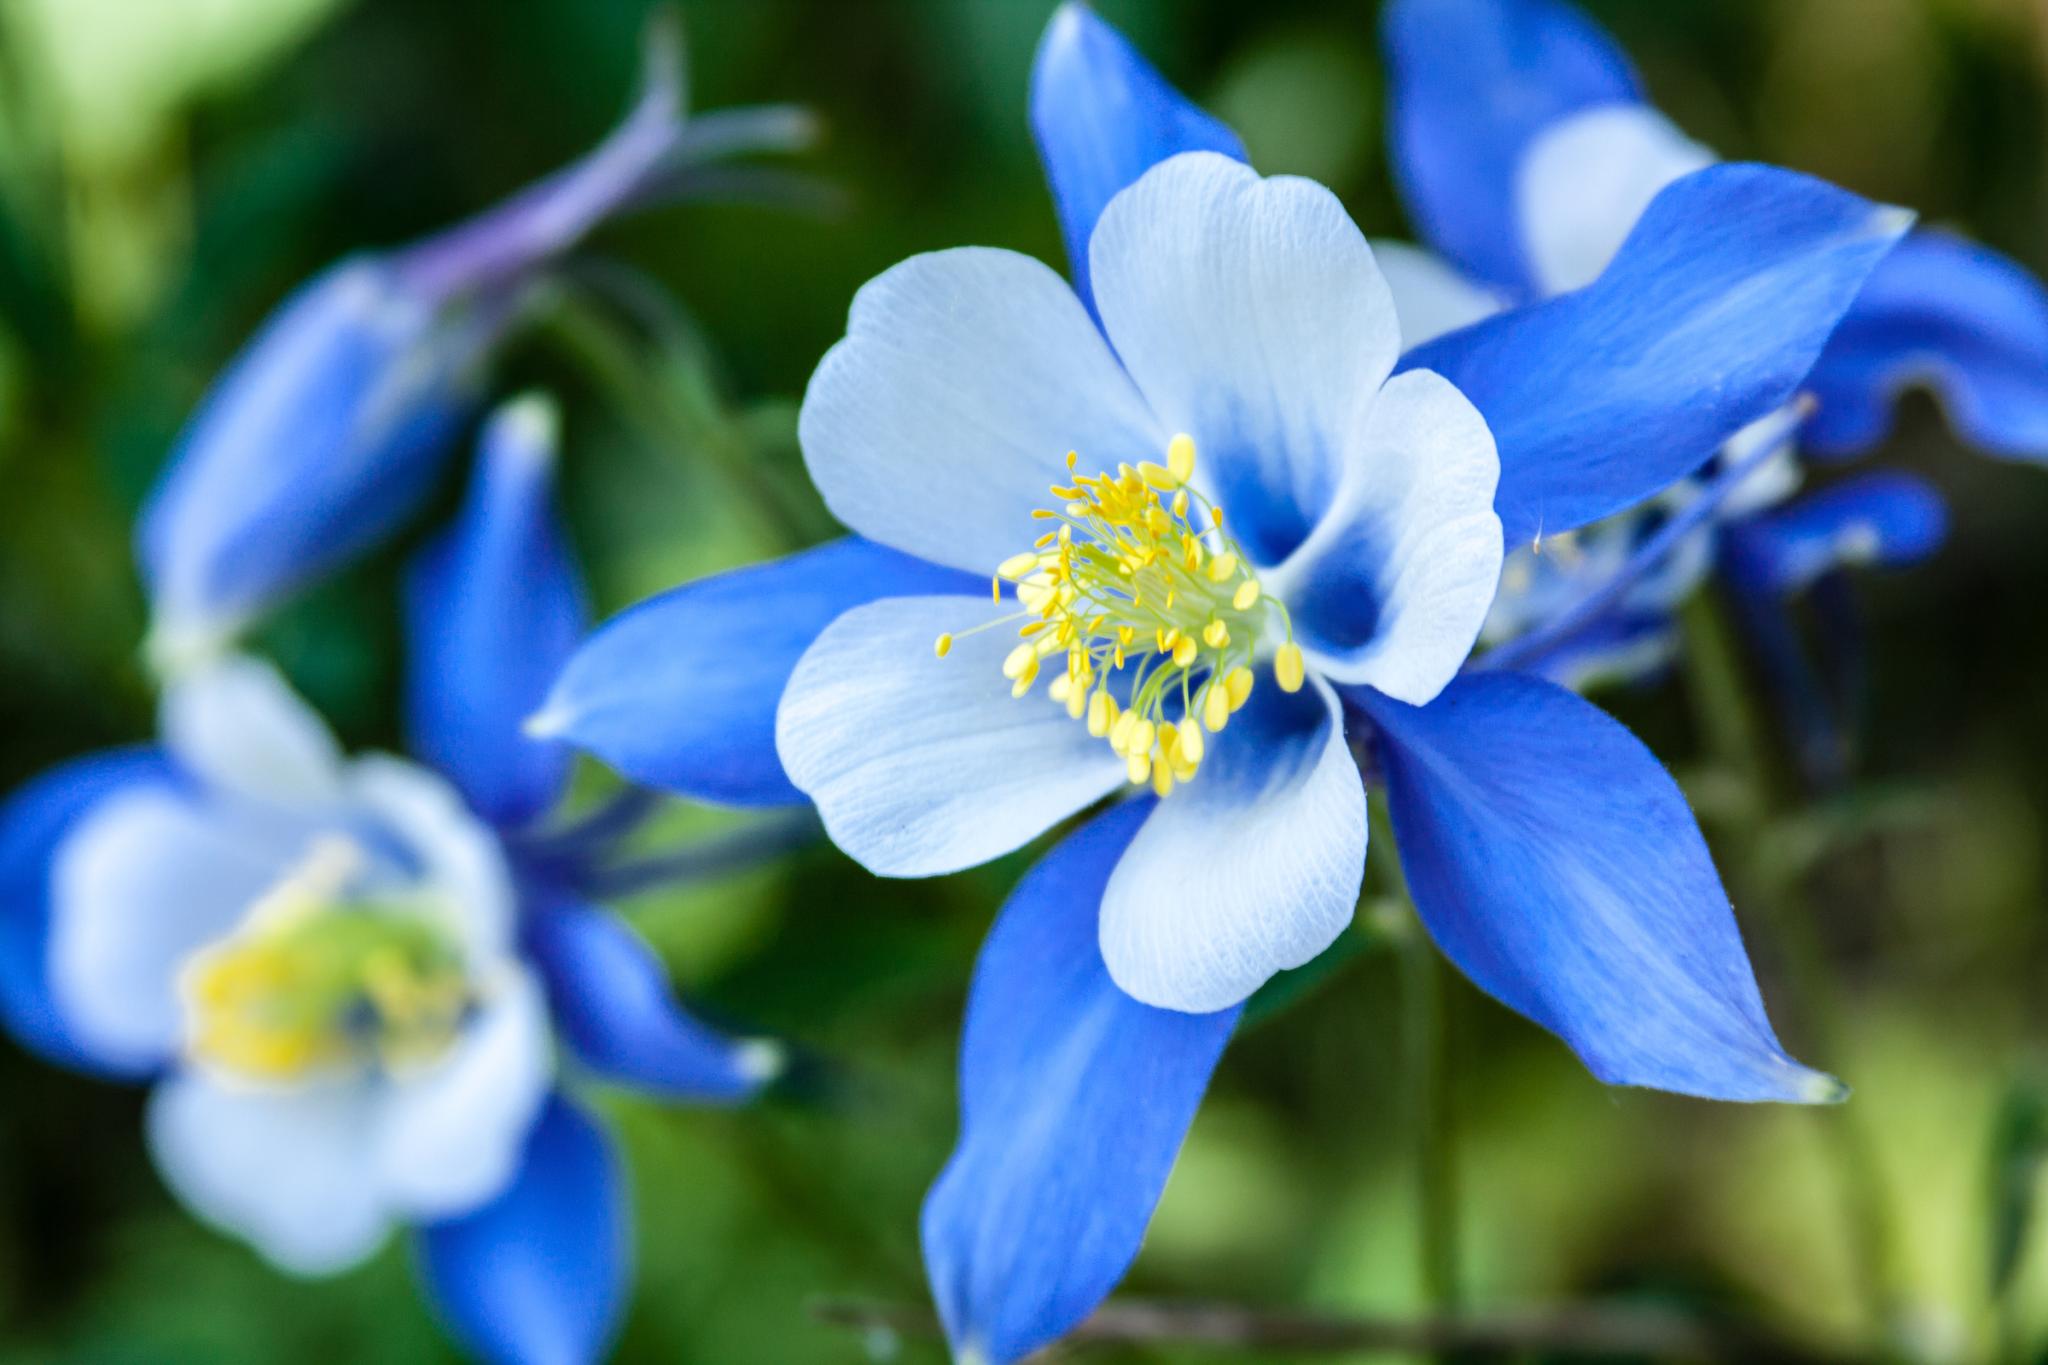 columbine: how to plant, grow, and care for columbine flowers